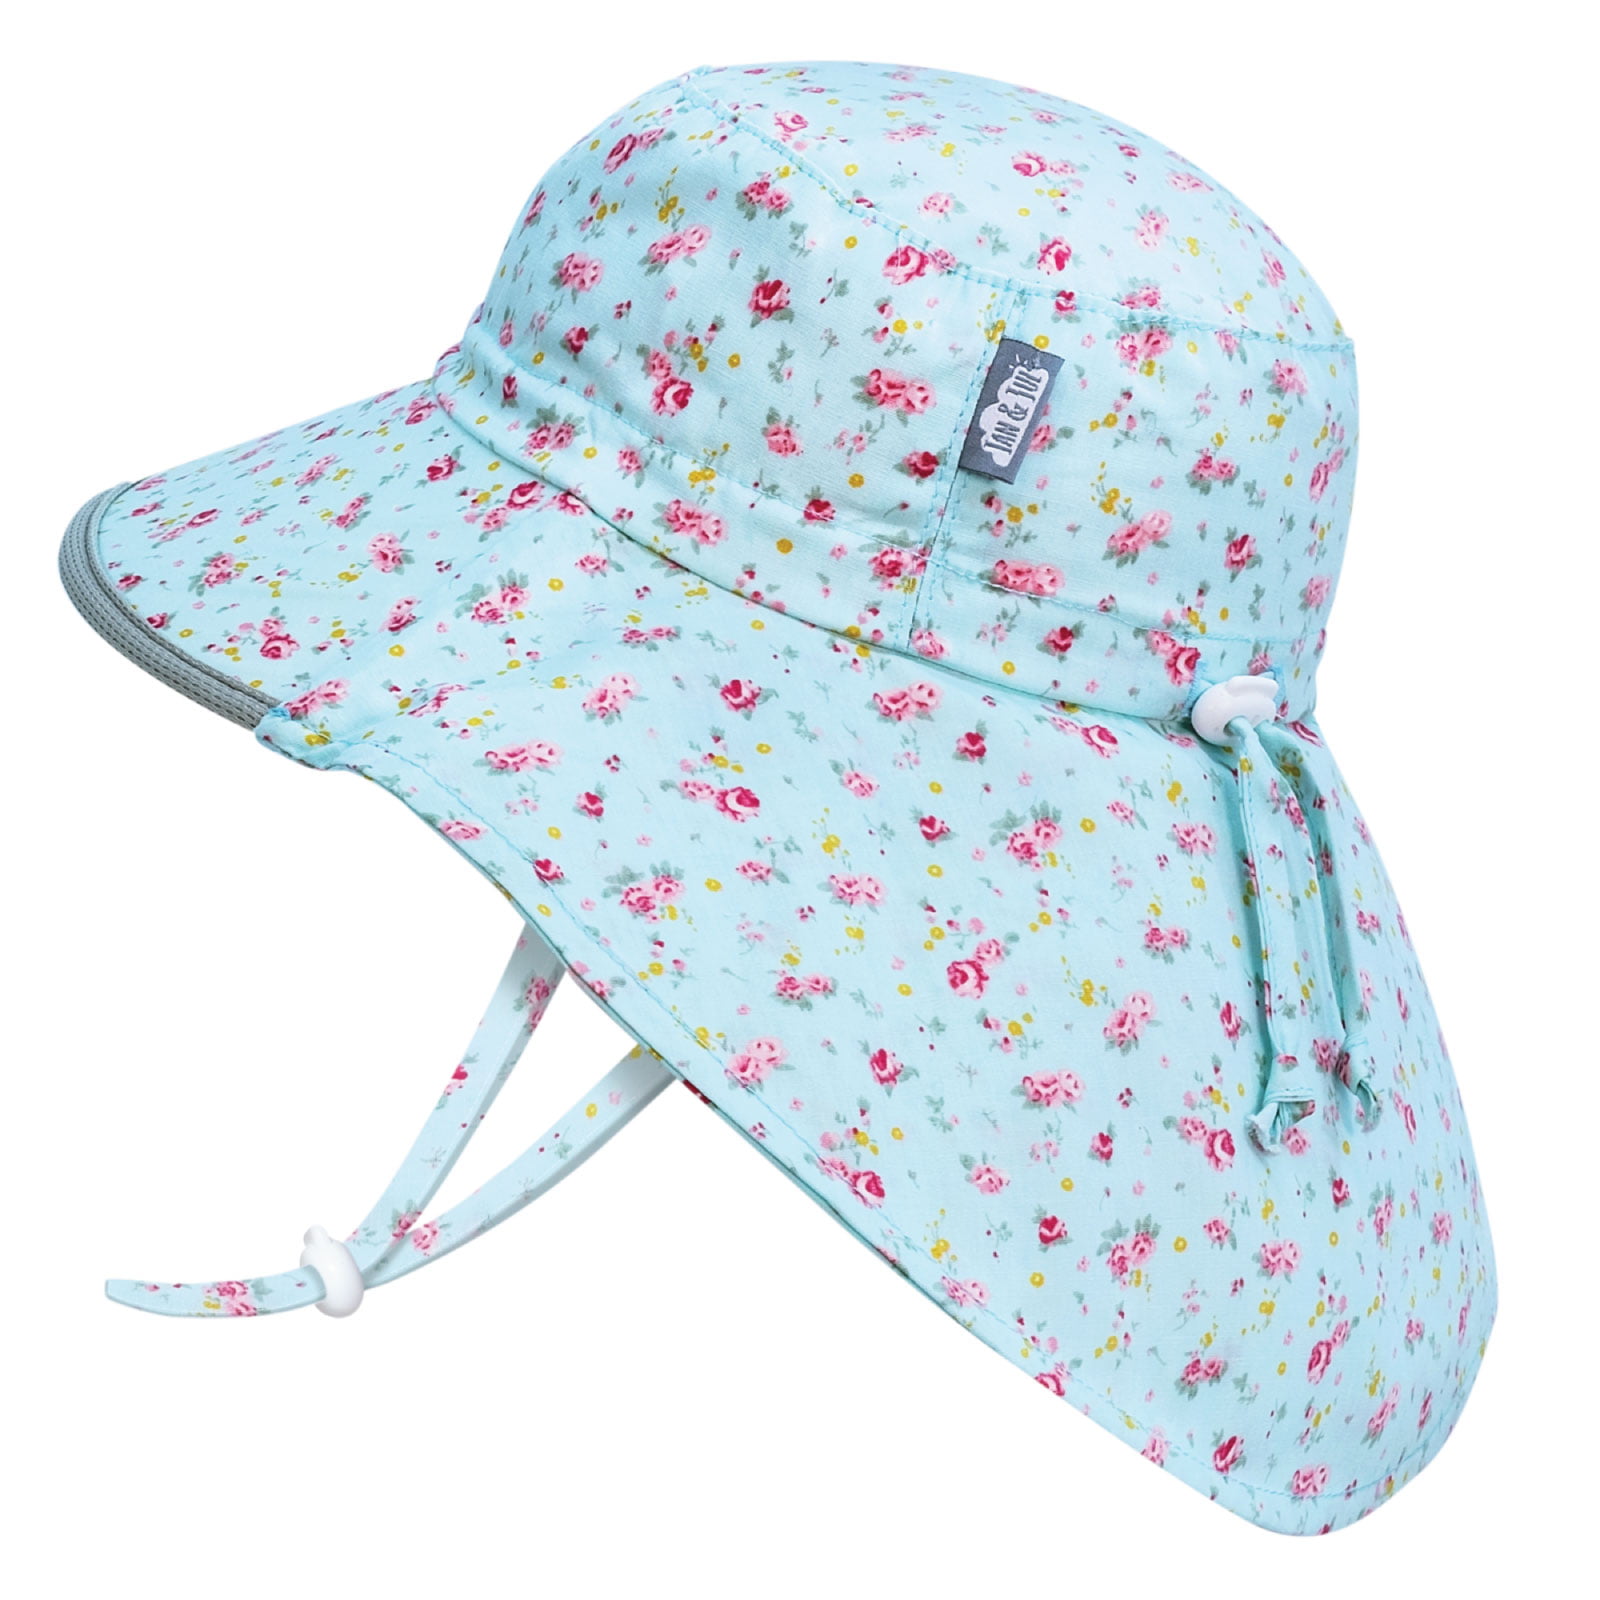 Breathable Cotton Jan & Jul GRO-with-Me Cotton Floppy Adjustable Sun-Hat for Girls UPF 50 